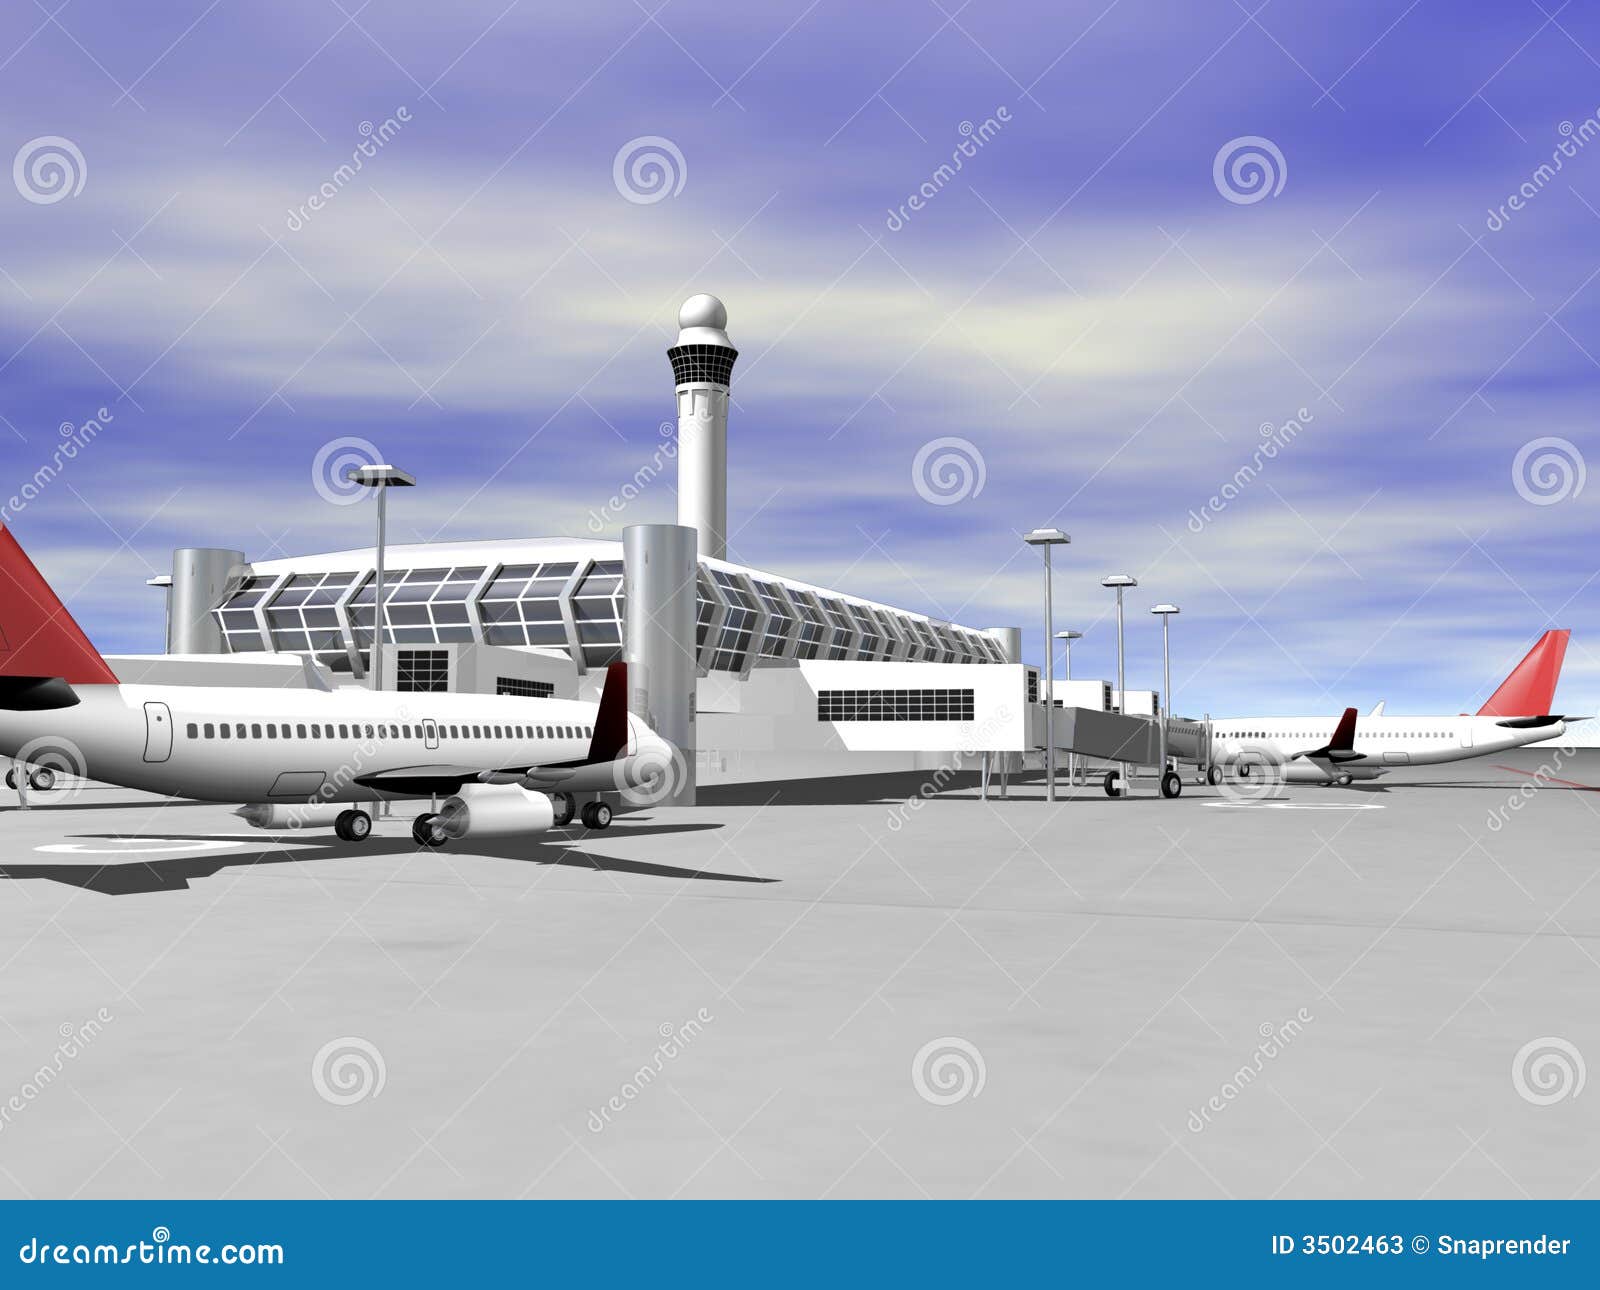 airport clipart images - photo #35